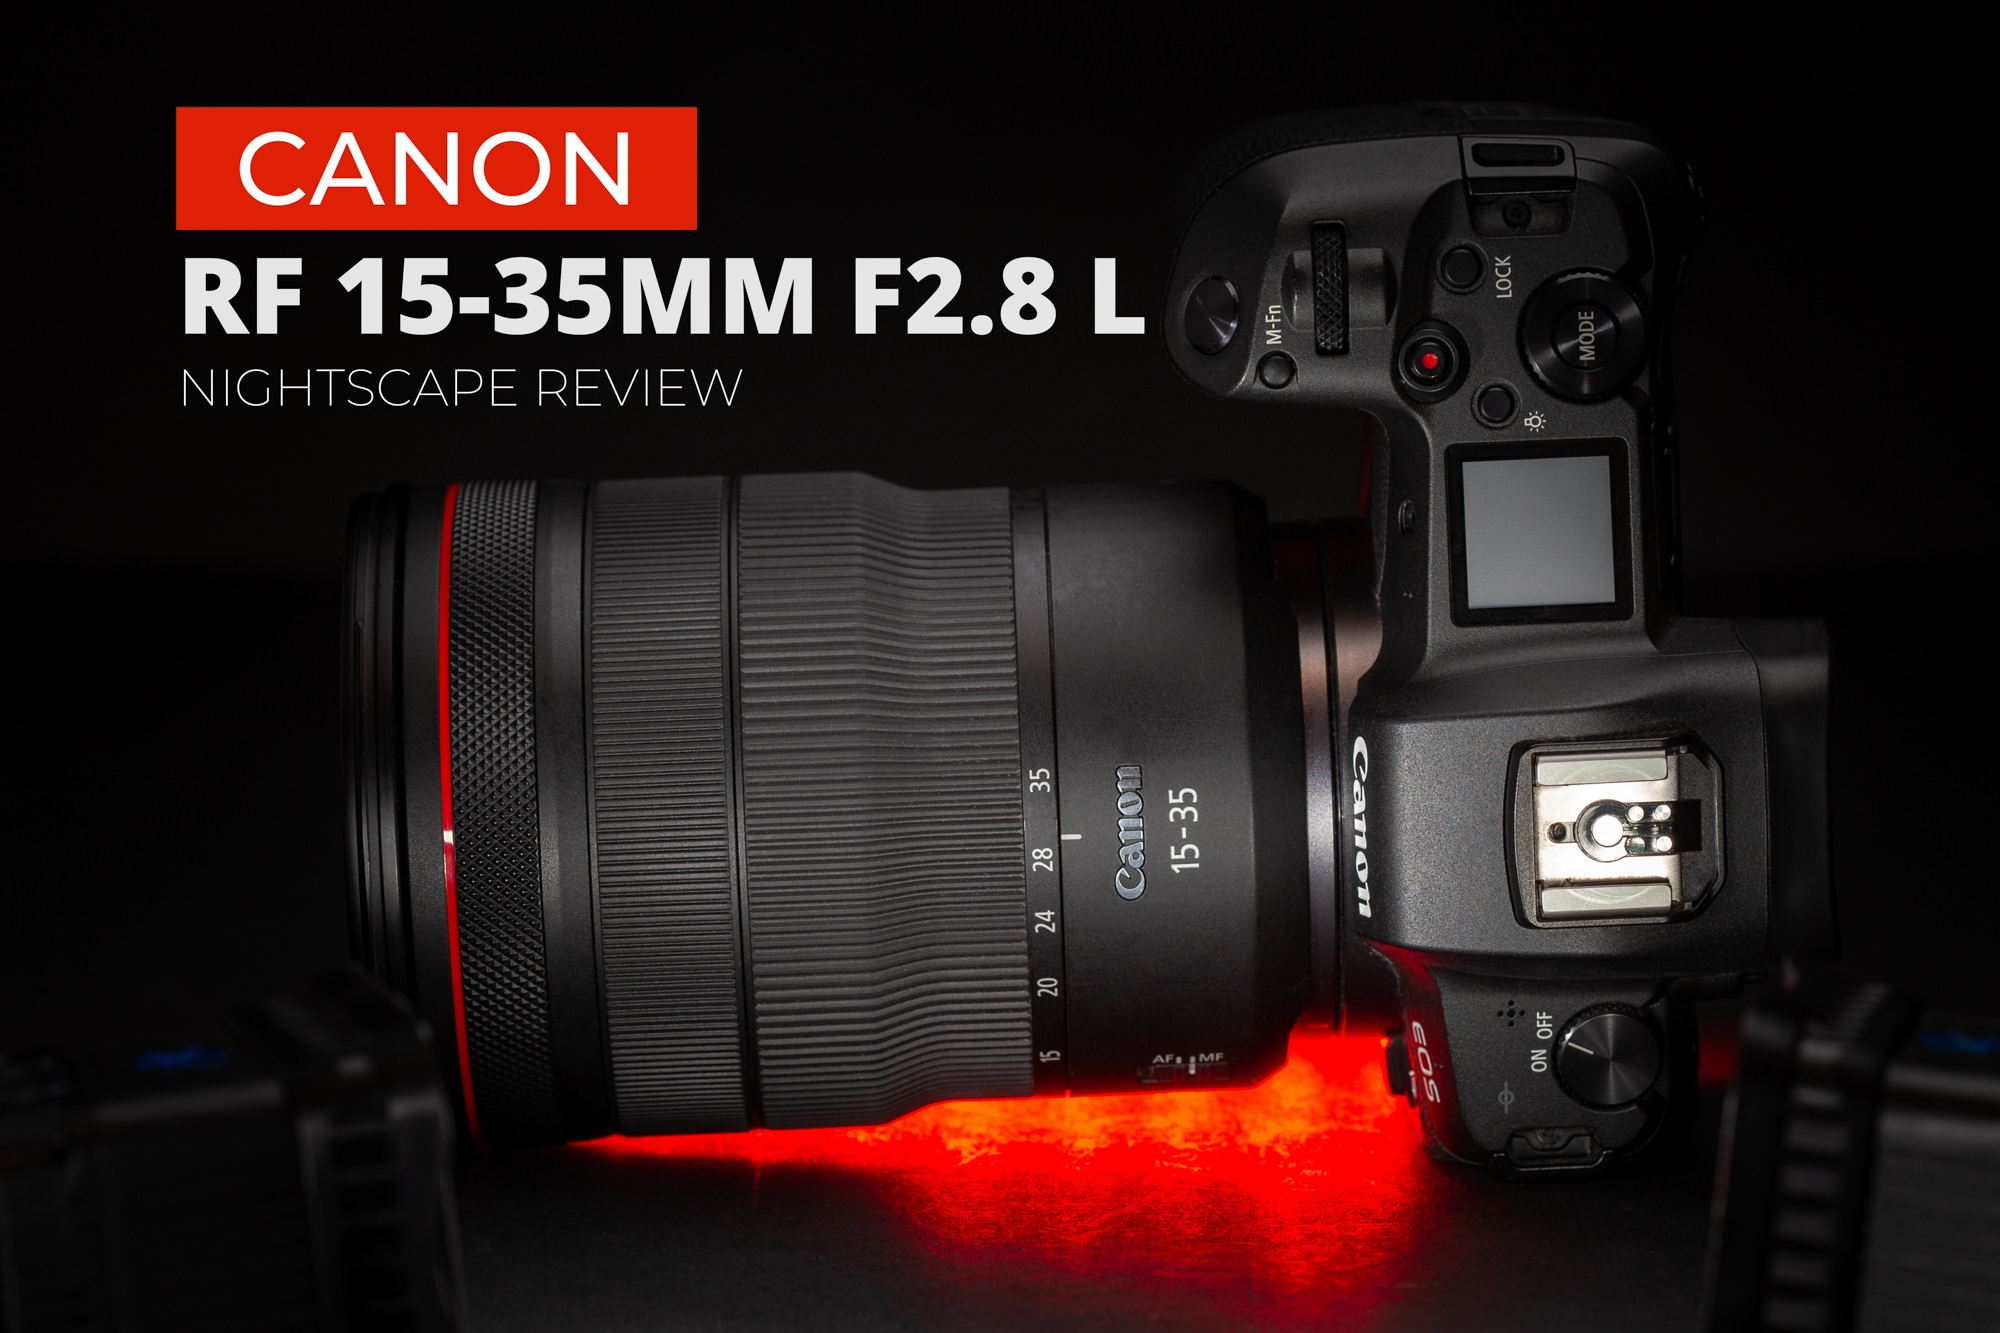 CANON RF 15-35MM F2.8 L IS USM – LENS REVIEW – Nightscape Photographer